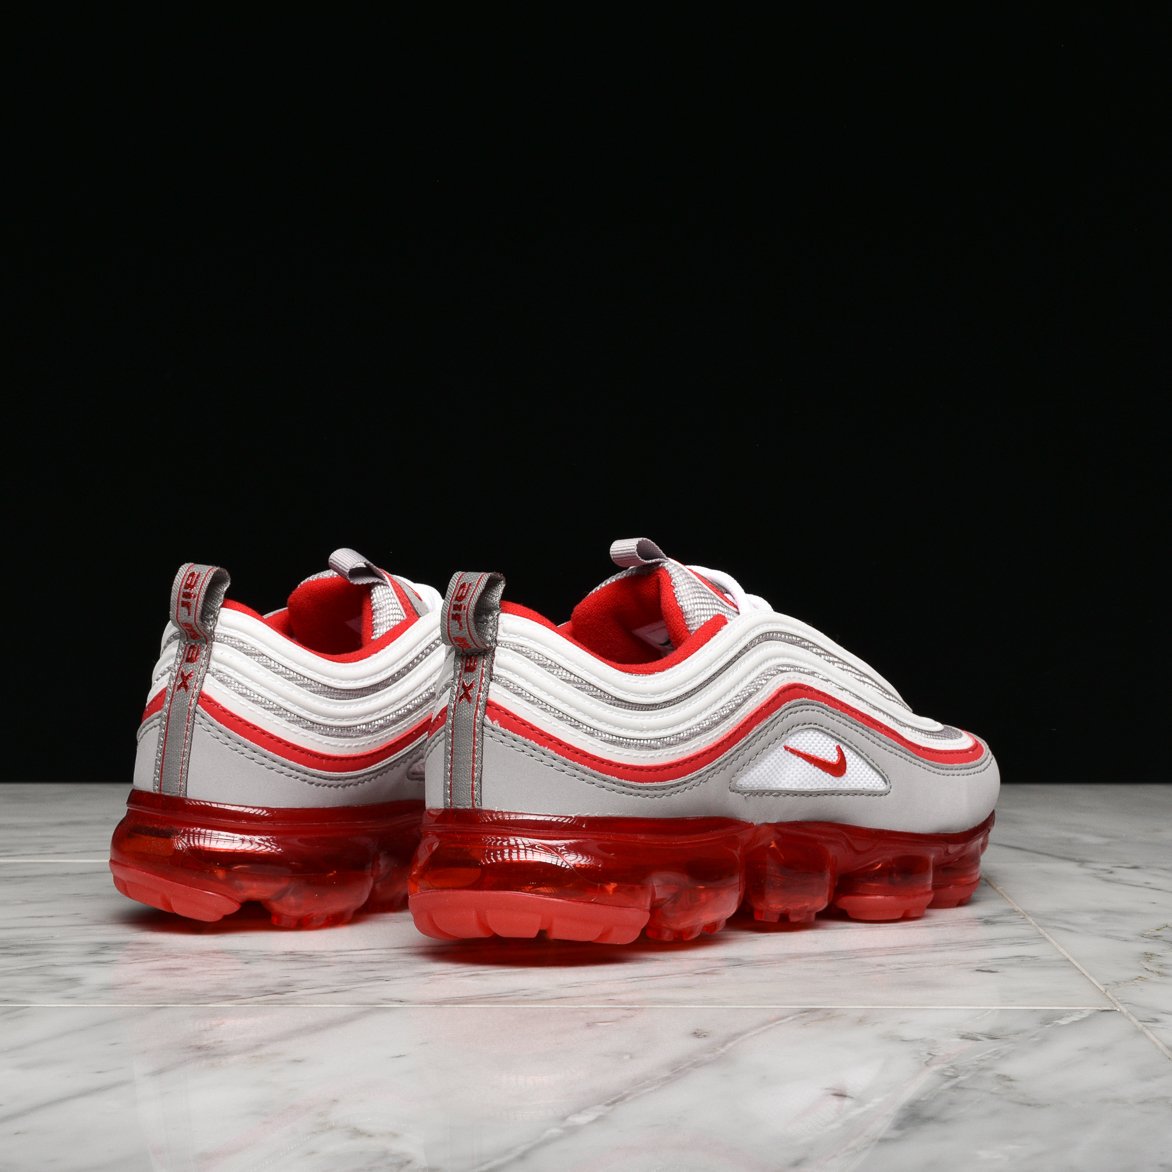 Nike vapormax 97 Buy Sale without Cdiscount.com